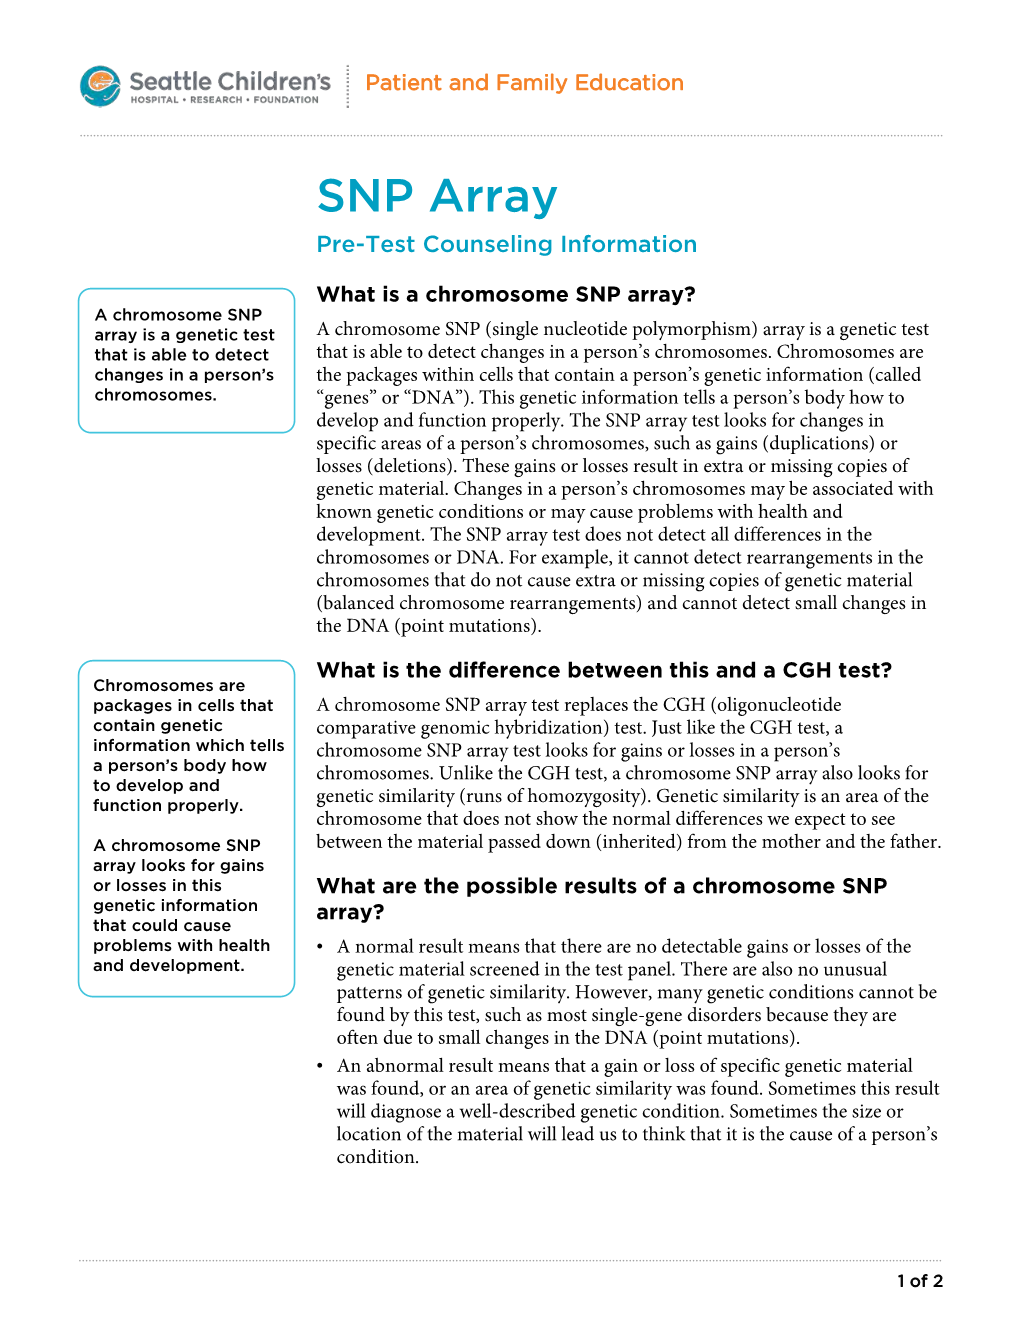 SNP Array Pre-Test Counseling Information